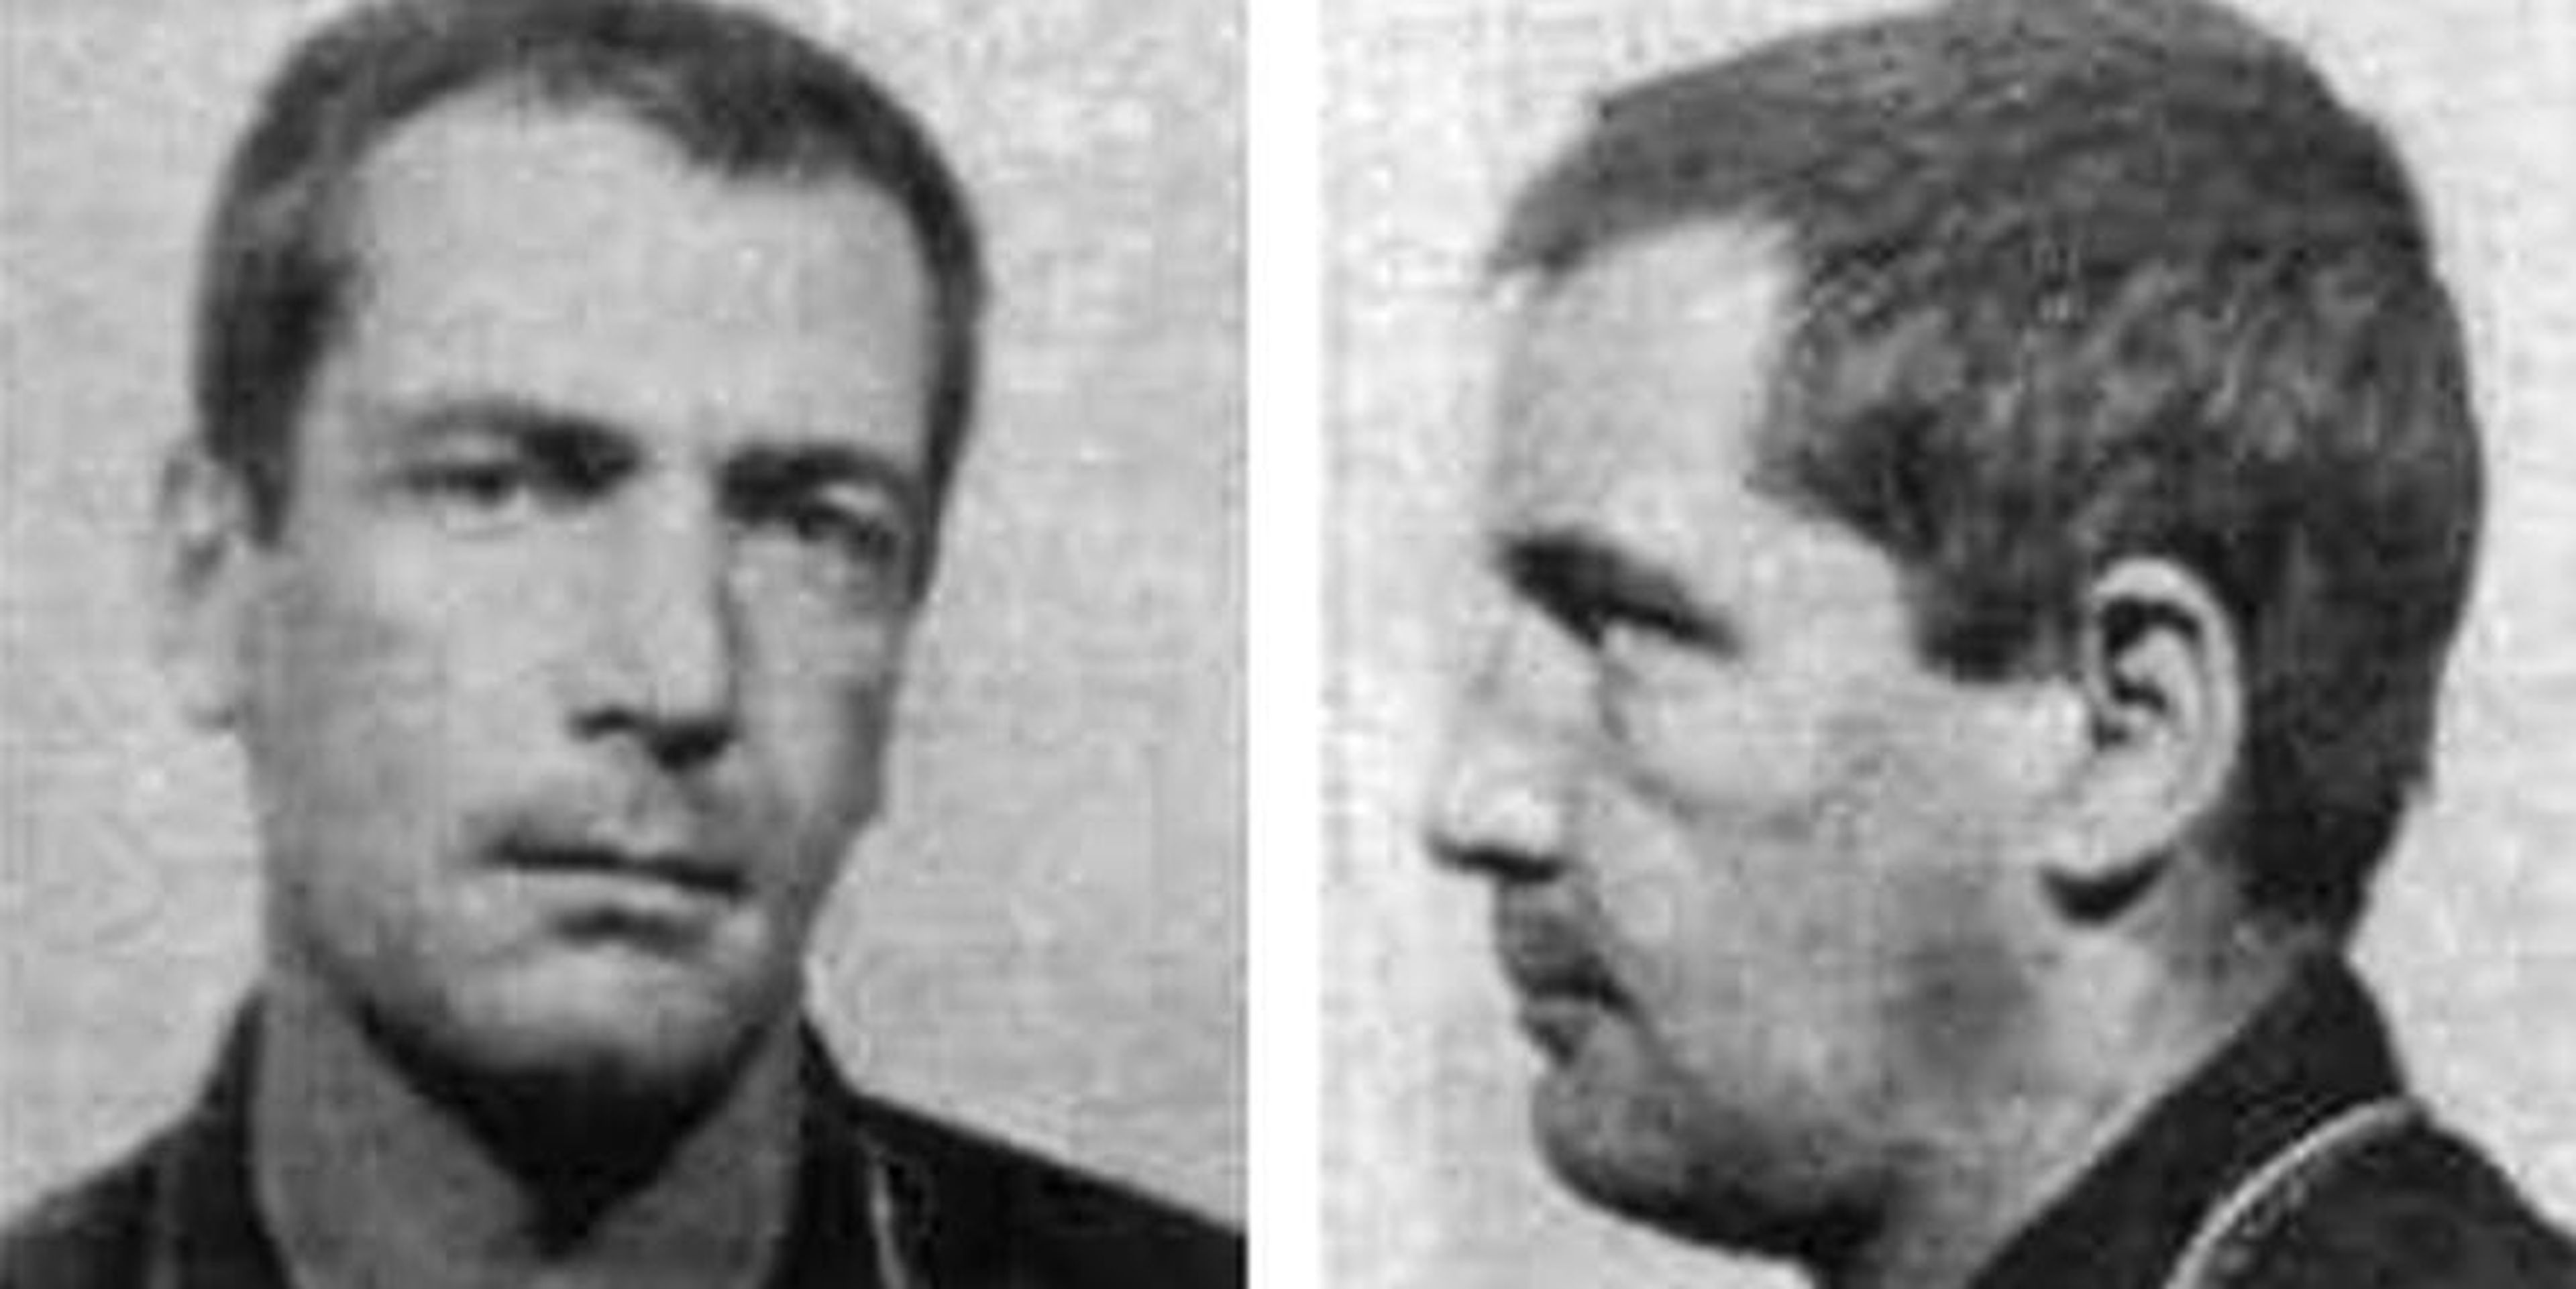 Gary Gilmore, the convicted murderer who inspired the "Just Do It" slogan.